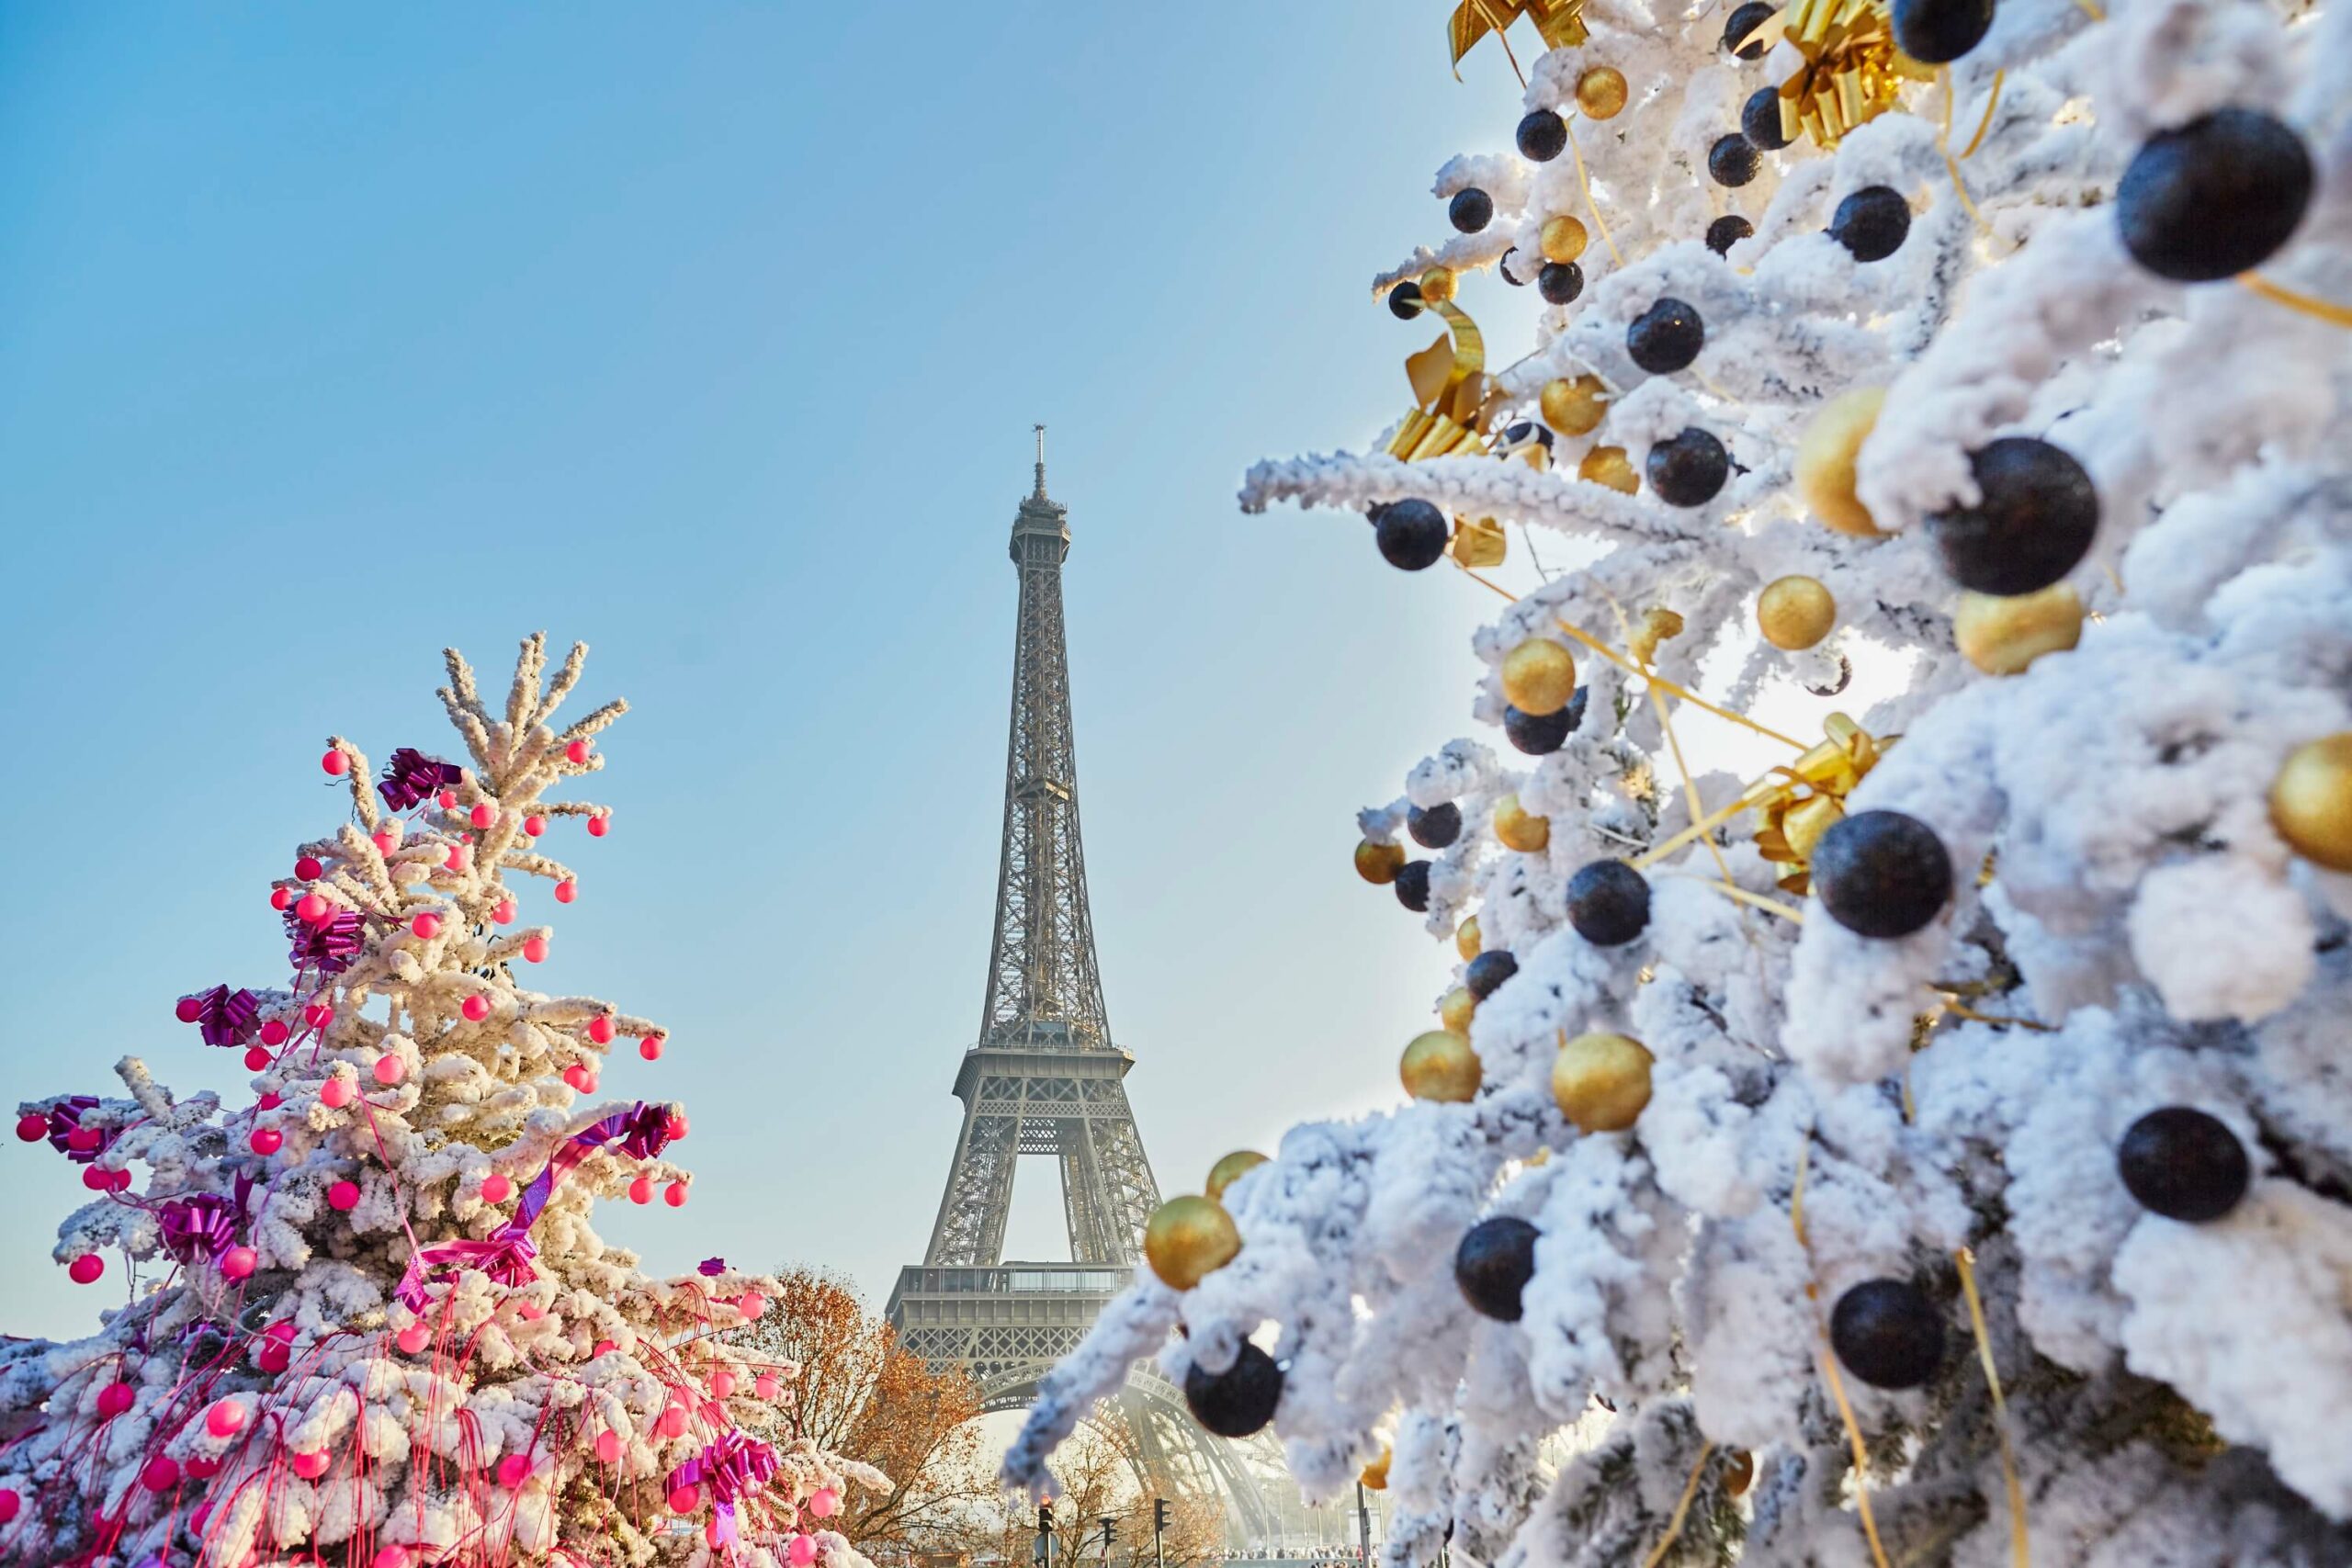 Eiffel tower and Christmas trees in Paris.